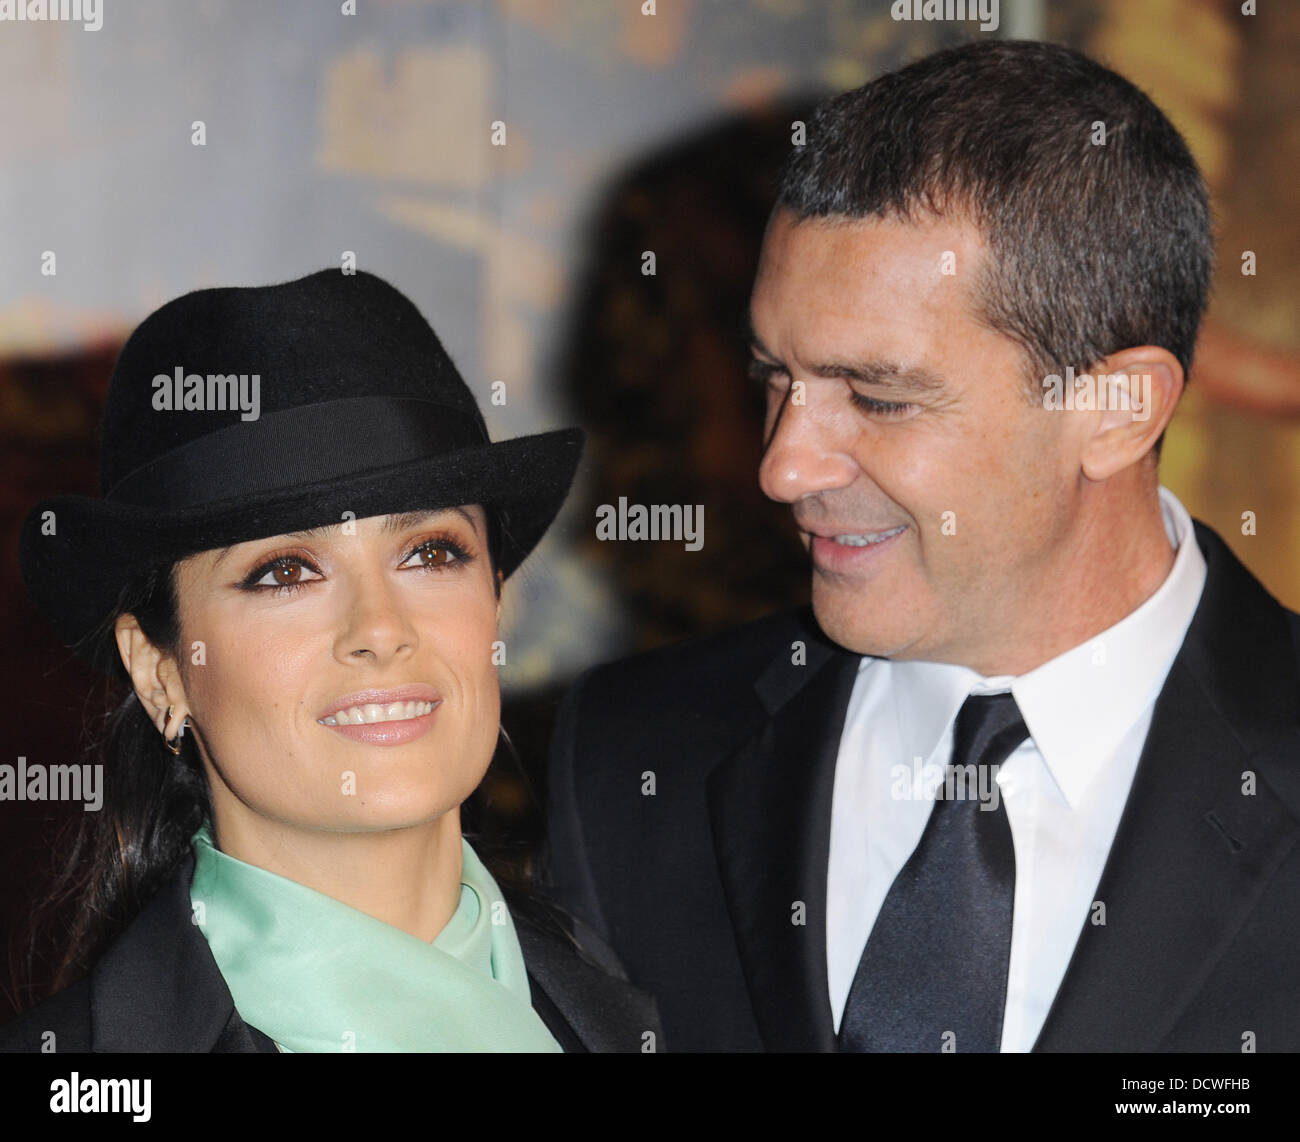 Antonio Banderas and Salma Hayek at the premiere of Puss In Boots at Empire, Leicester Square, London, England- 24.11.11 Stock Photo